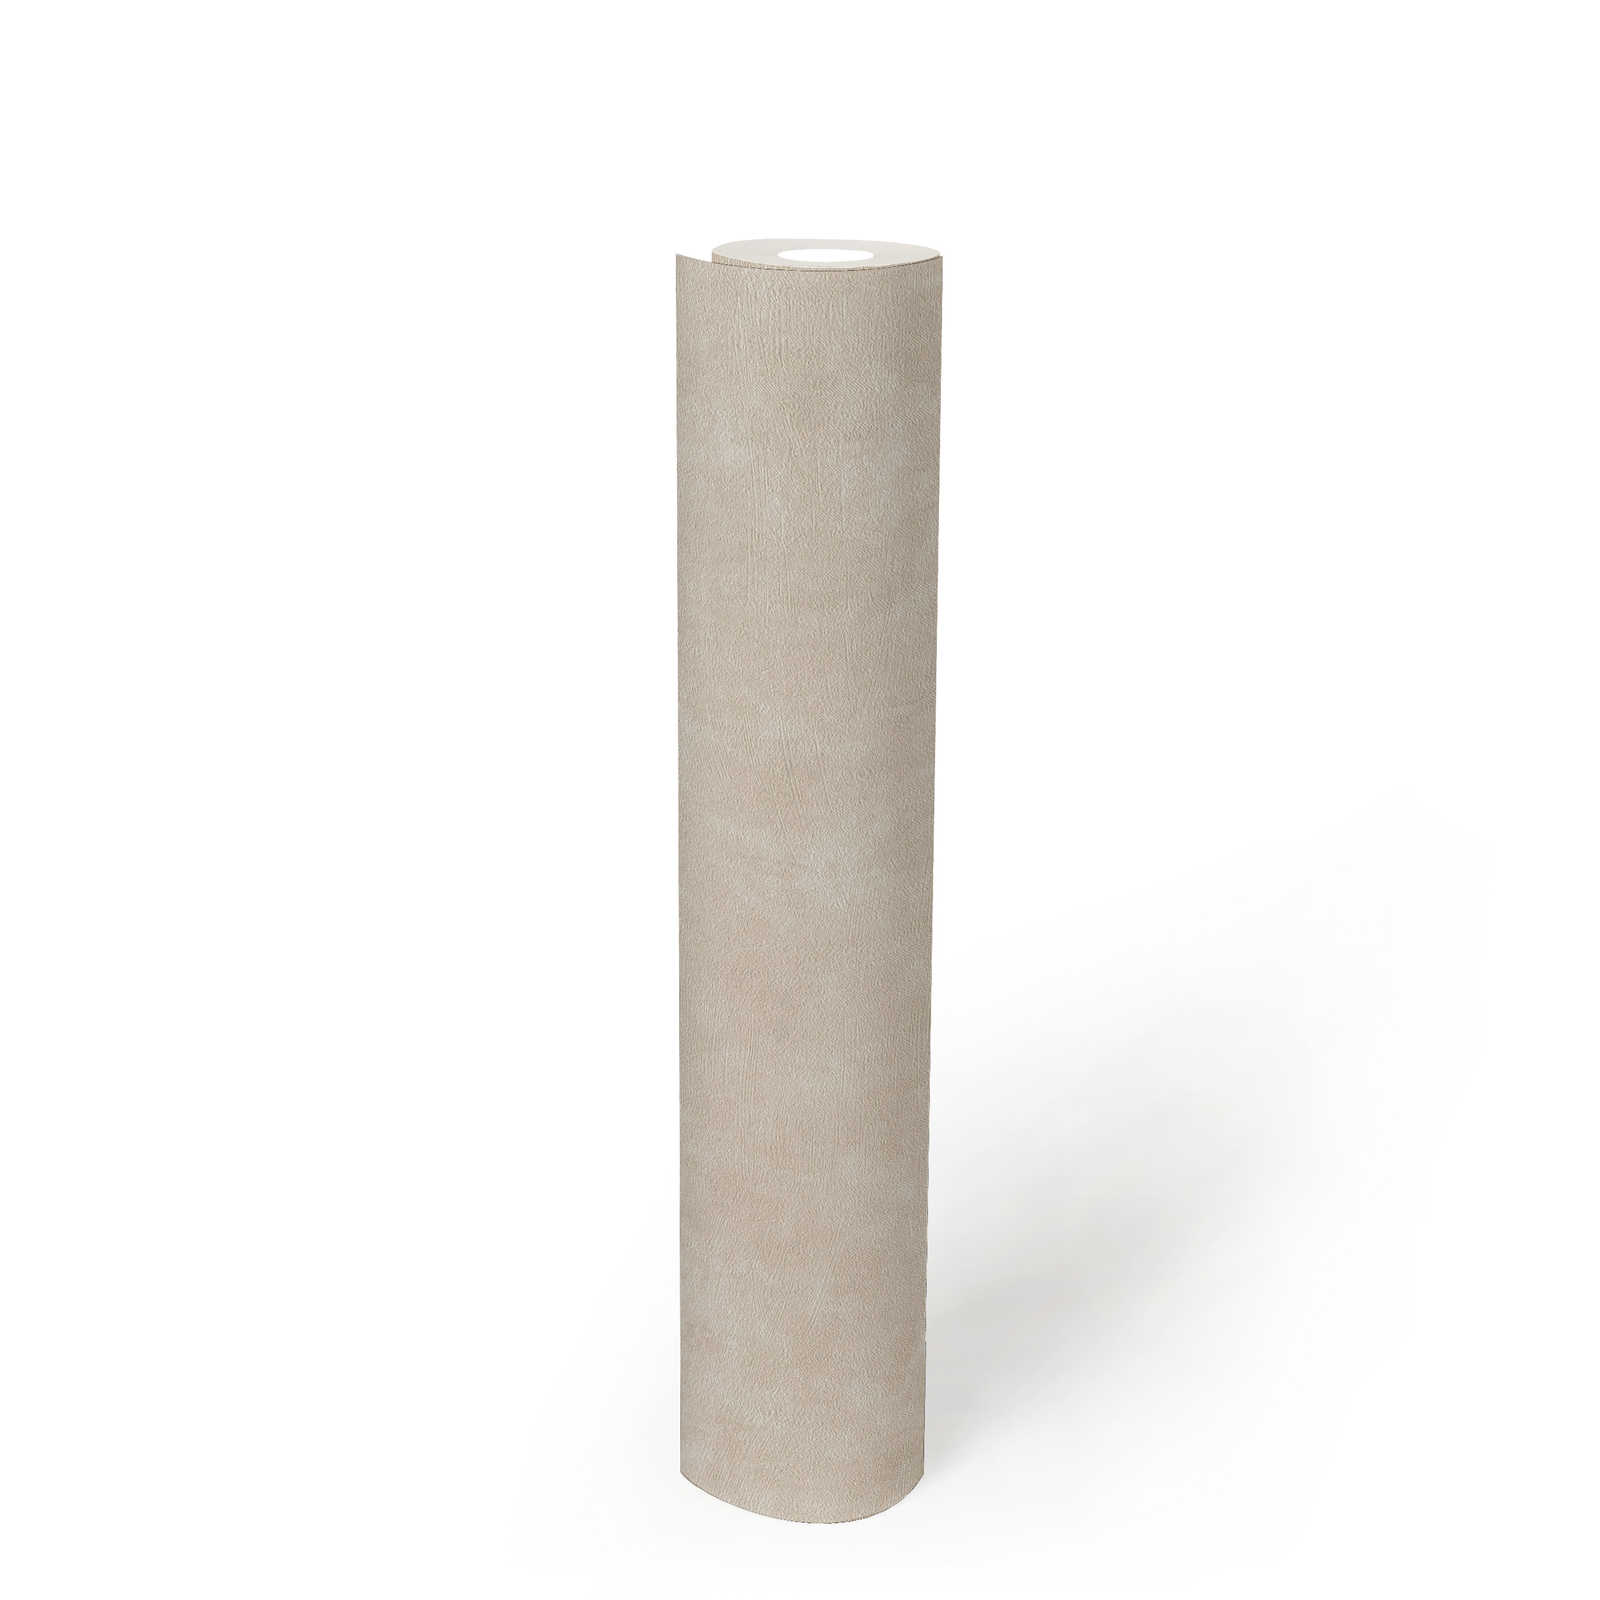             Non-woven wallpaper plains with concrete look and structure - cream, grey
        